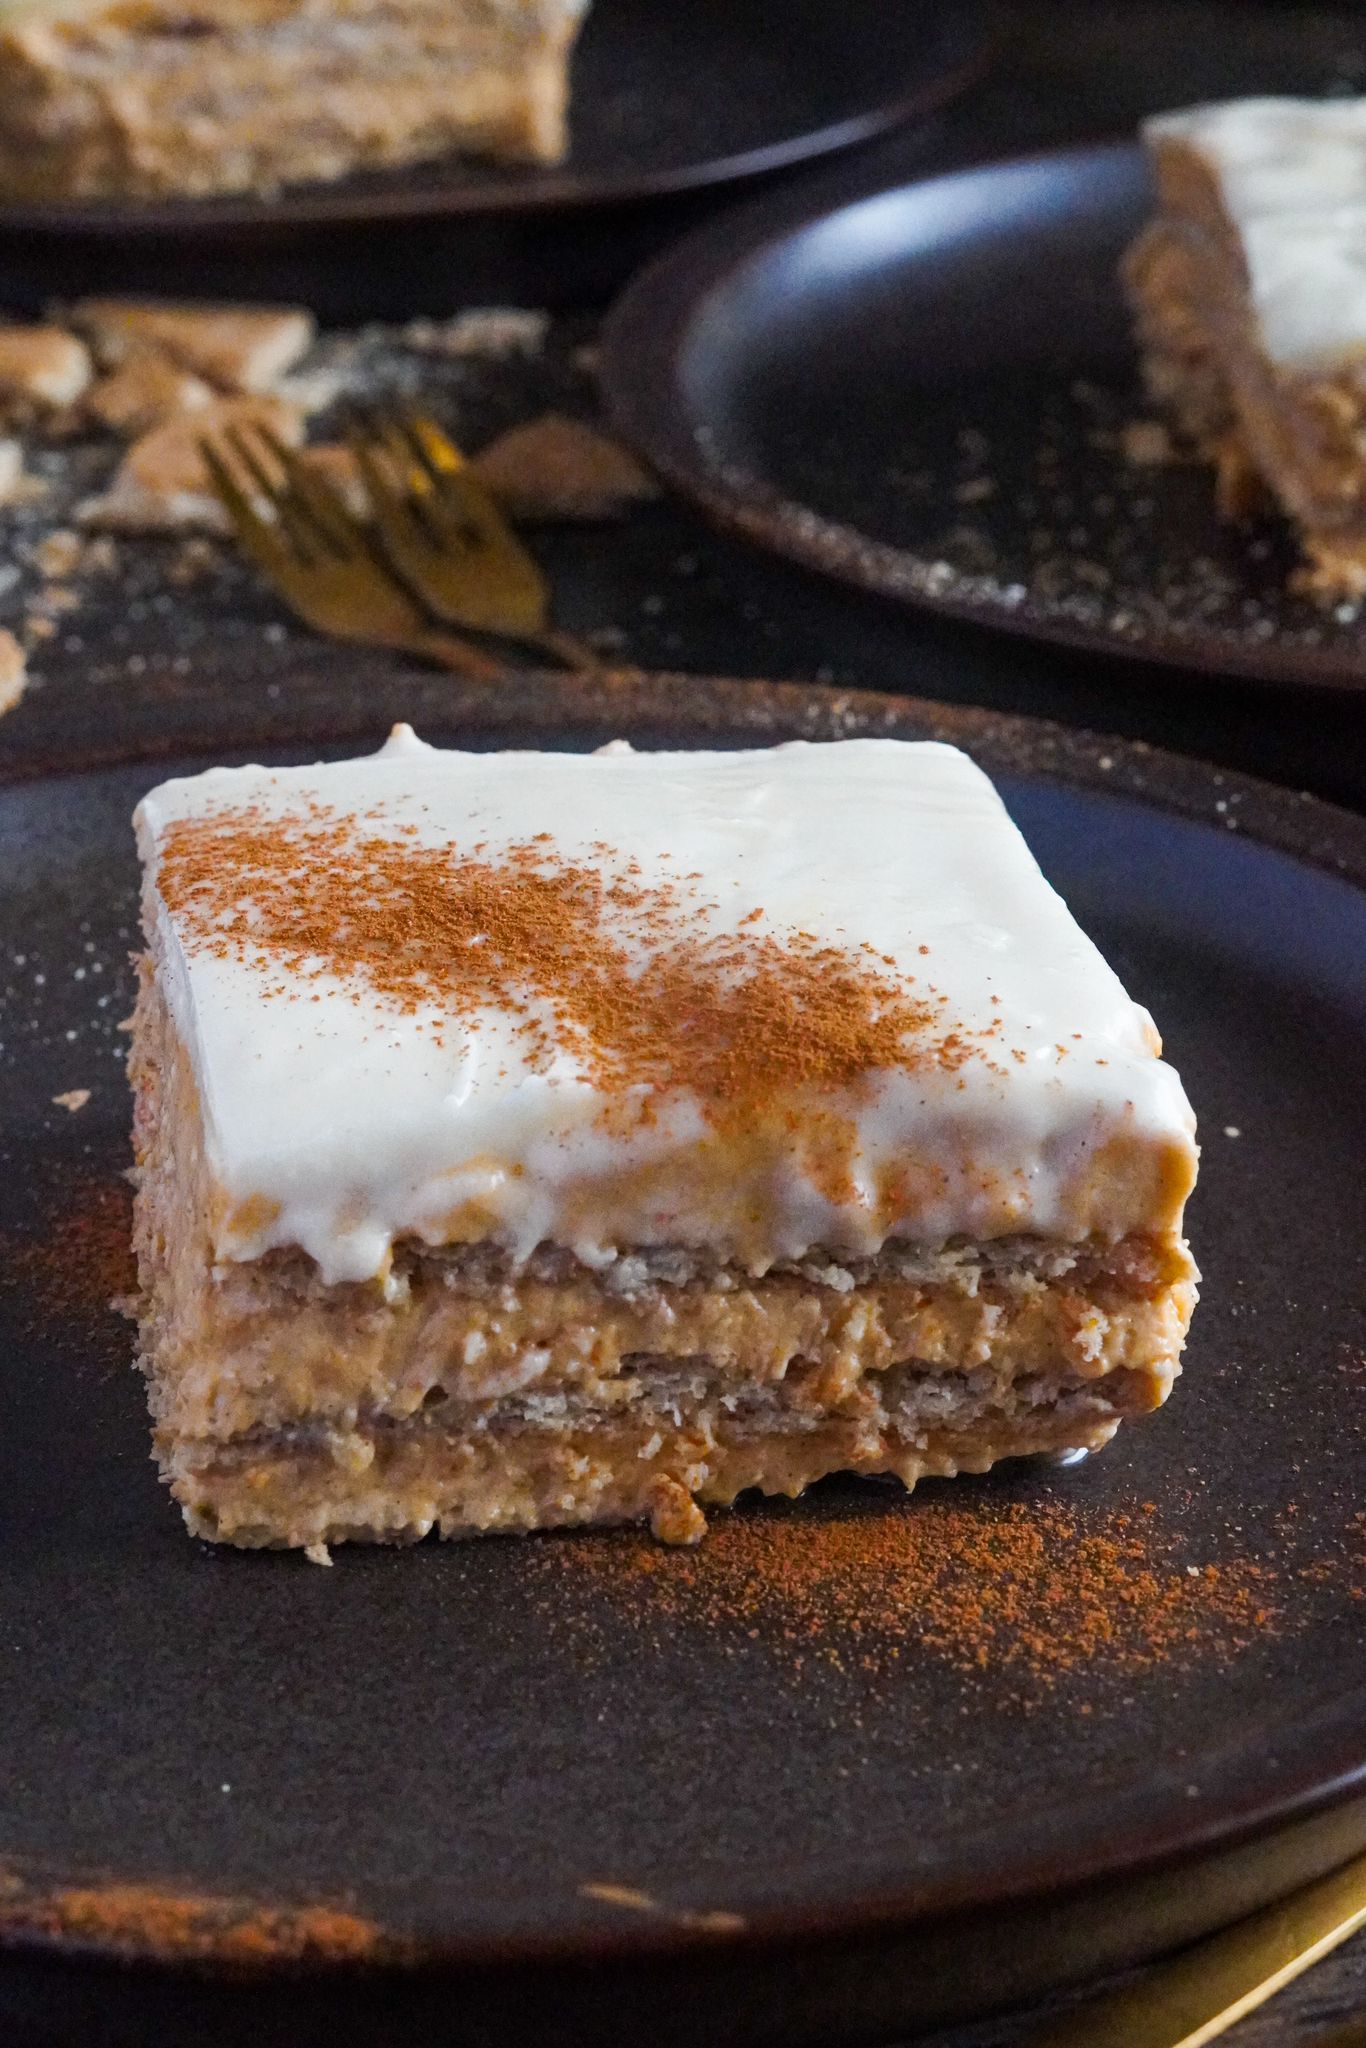 Pumpkin eclair cake featuring layers infused with the warm aroma of pumpkin pie spice